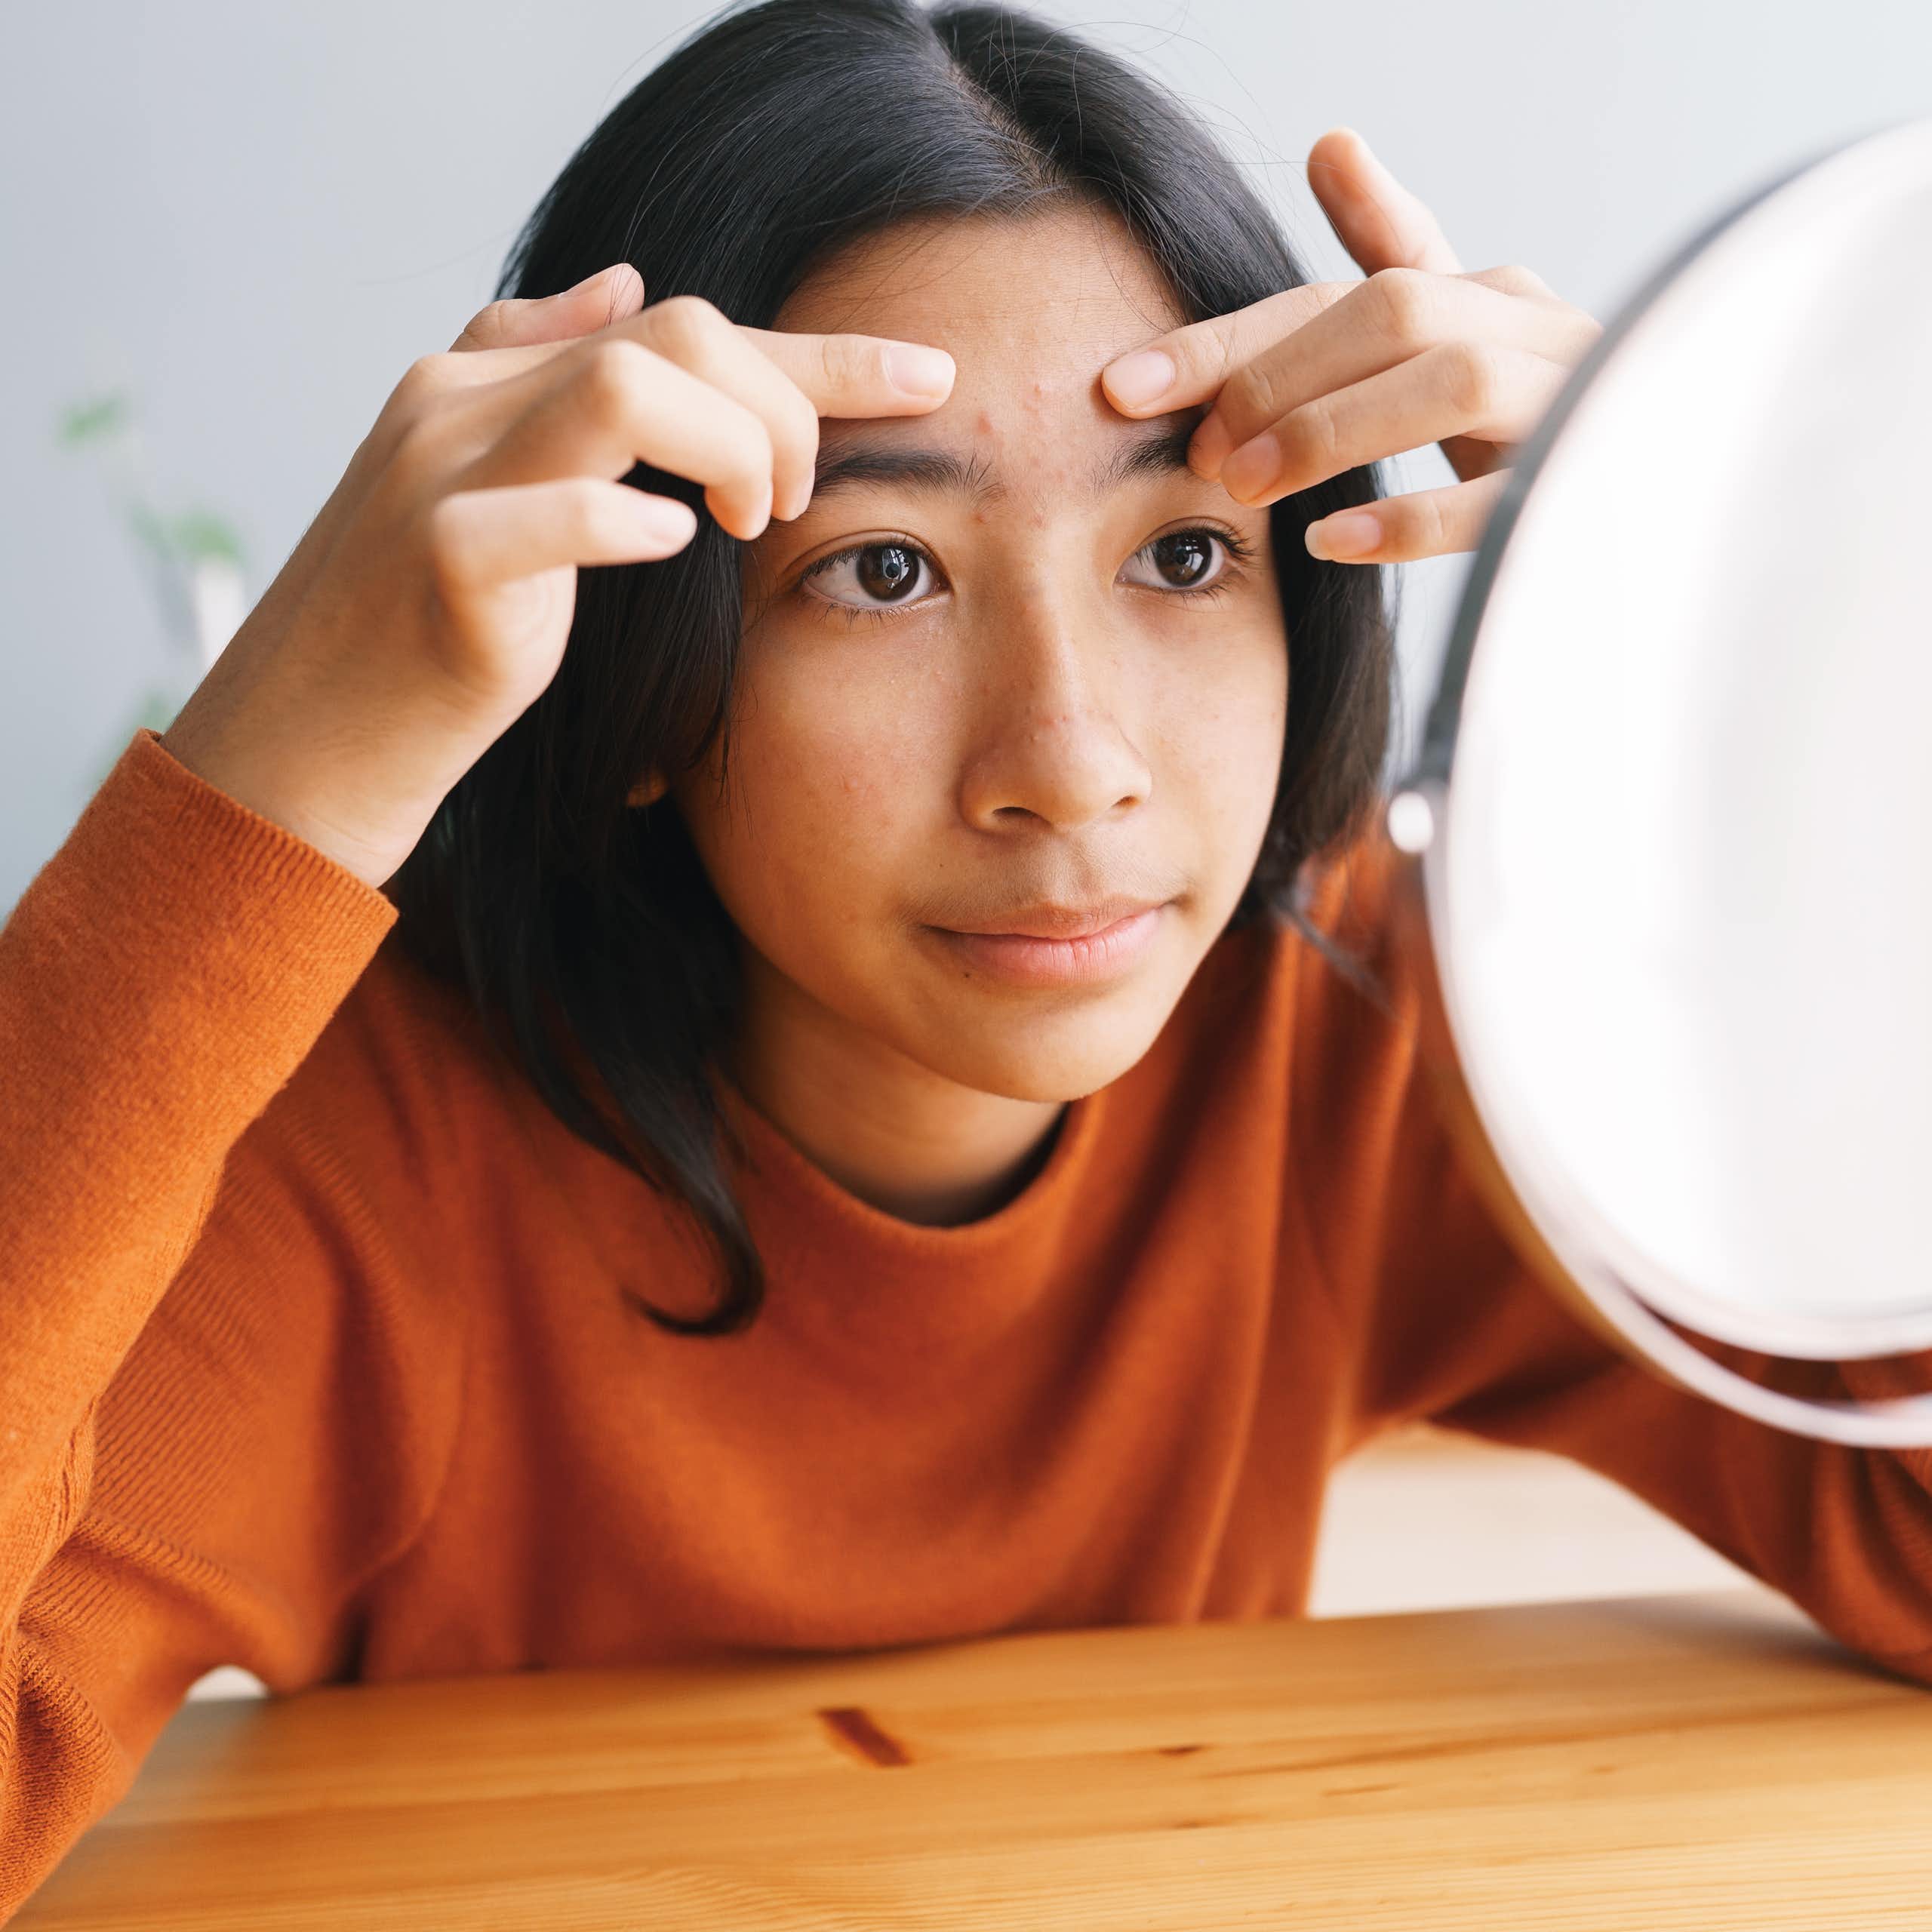 A young woman examines acne on her forehead in a mirror.